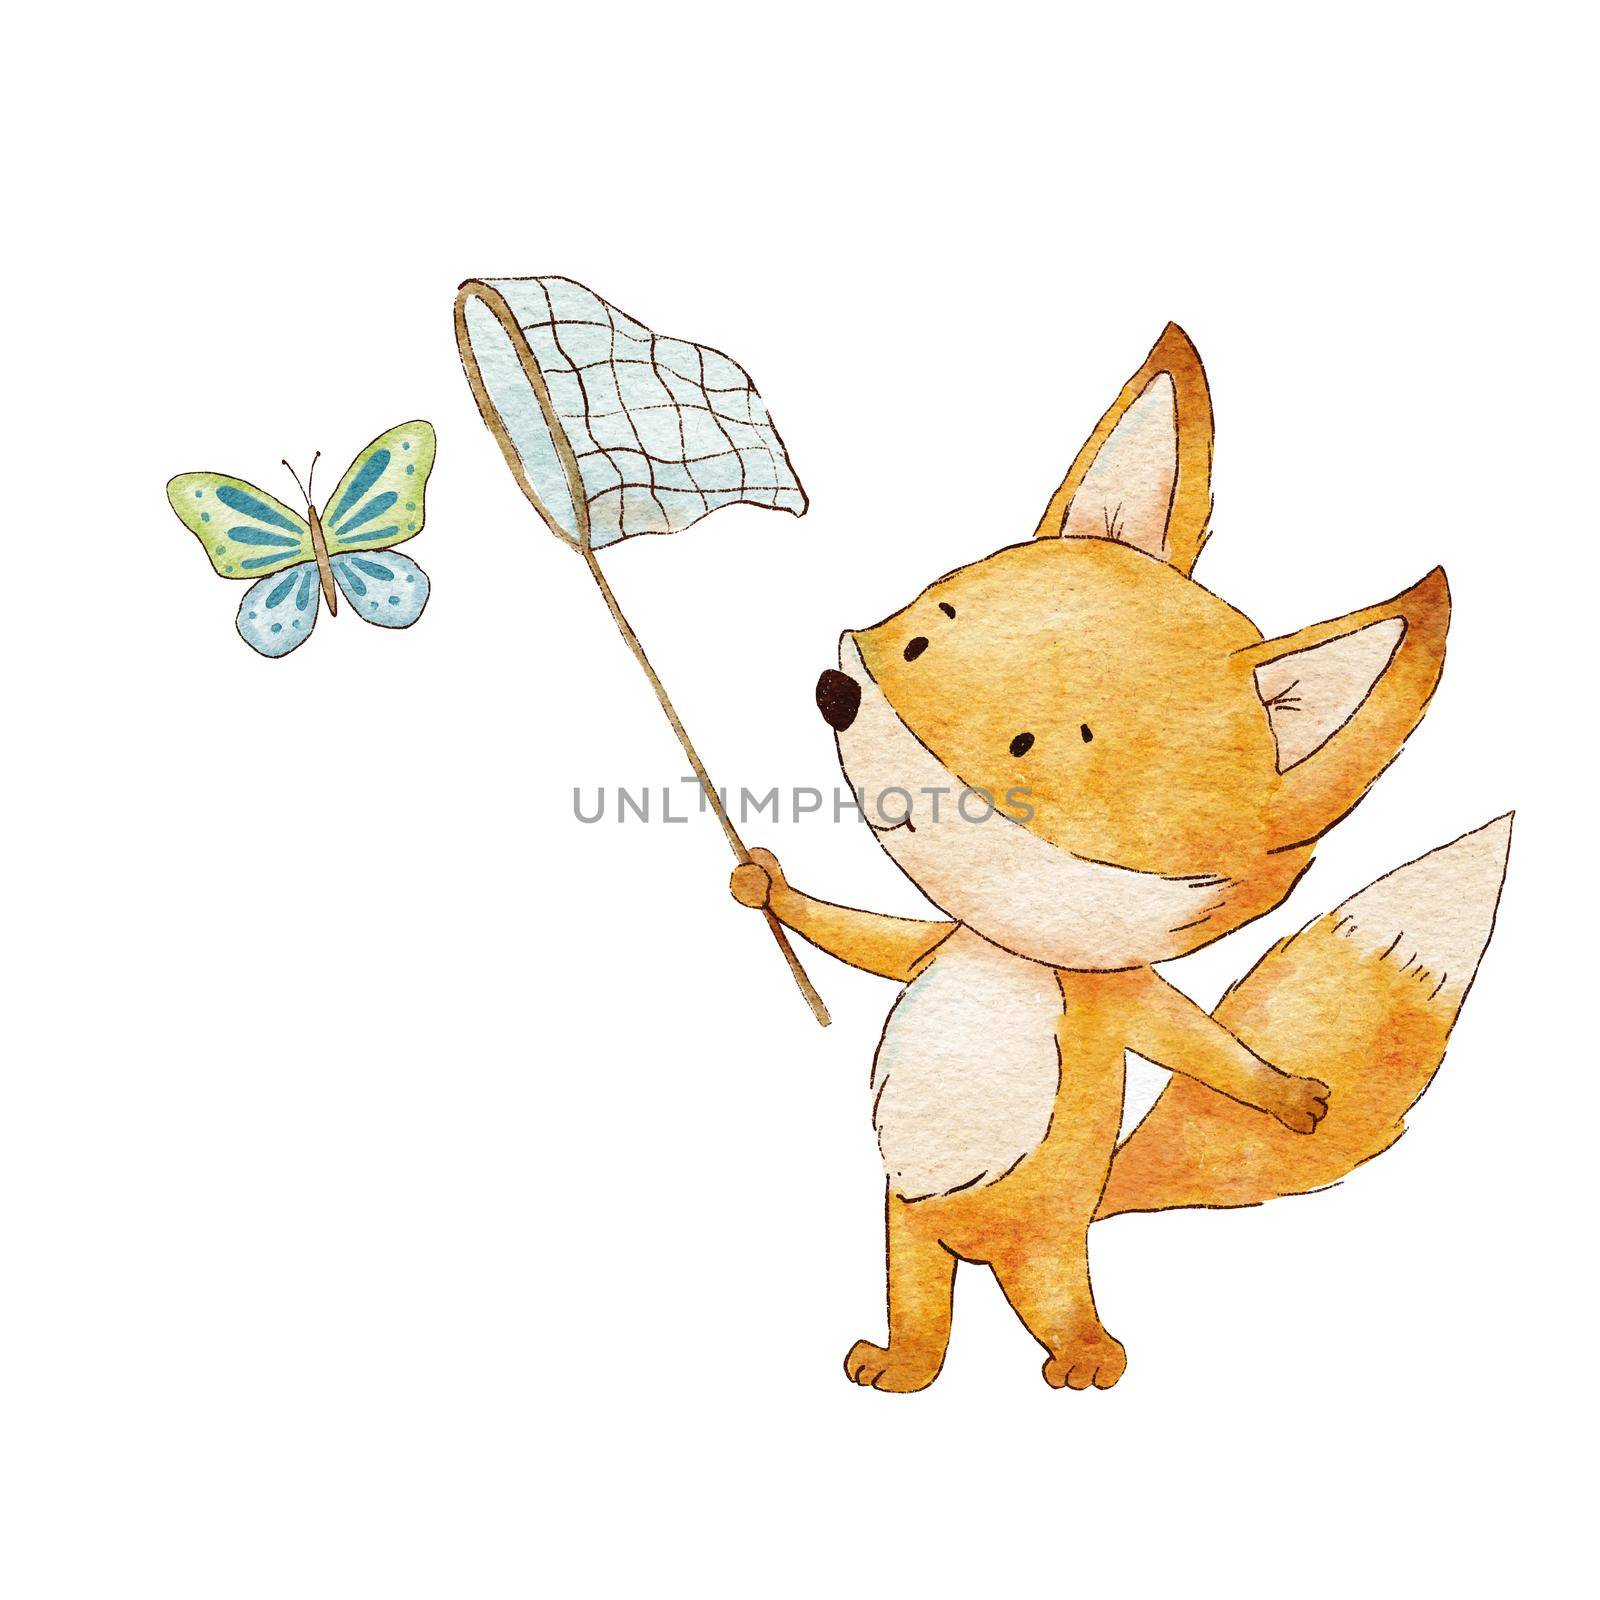 Cute baby fox with butterfly. Watercolor childish illustration isolated on white. Woodland little animal. Summer activity